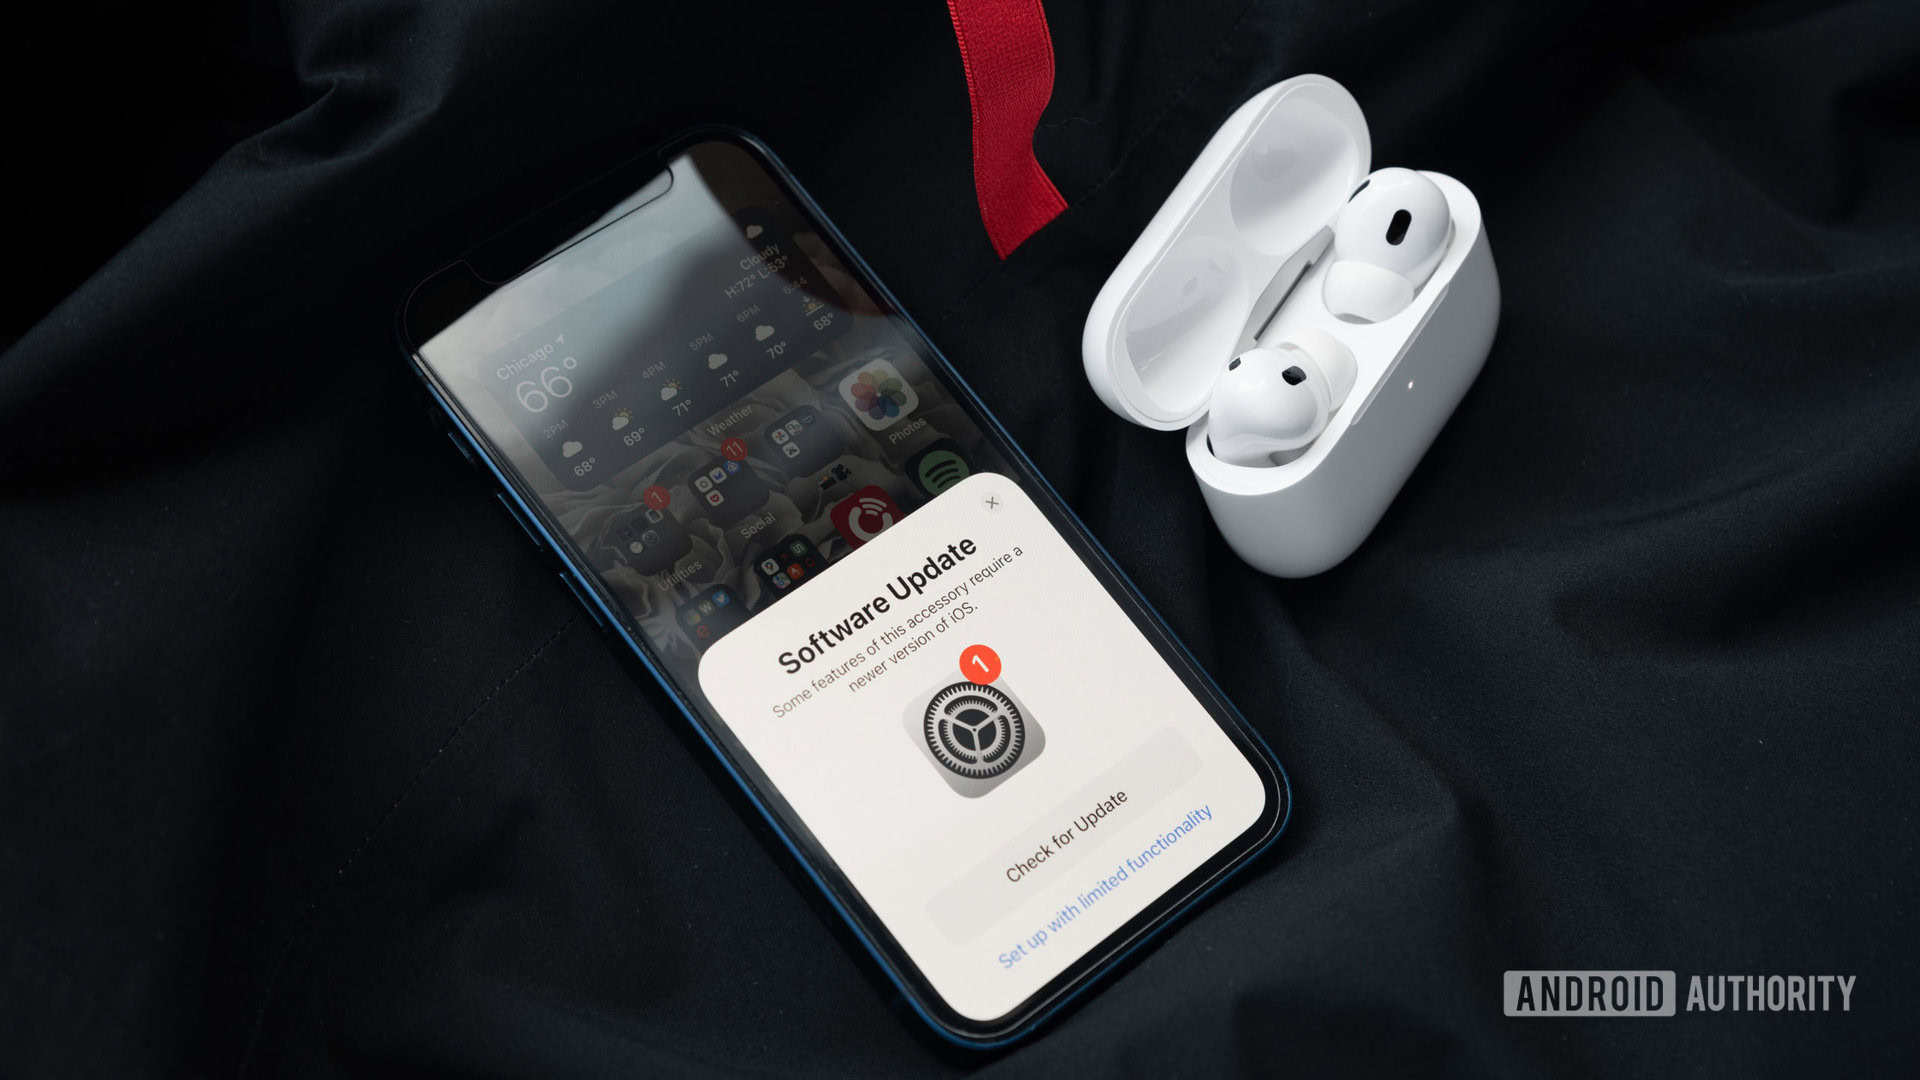 Diskutere Kassér Takt How to fix AirPods Pro and AirPods problems - Android Authority